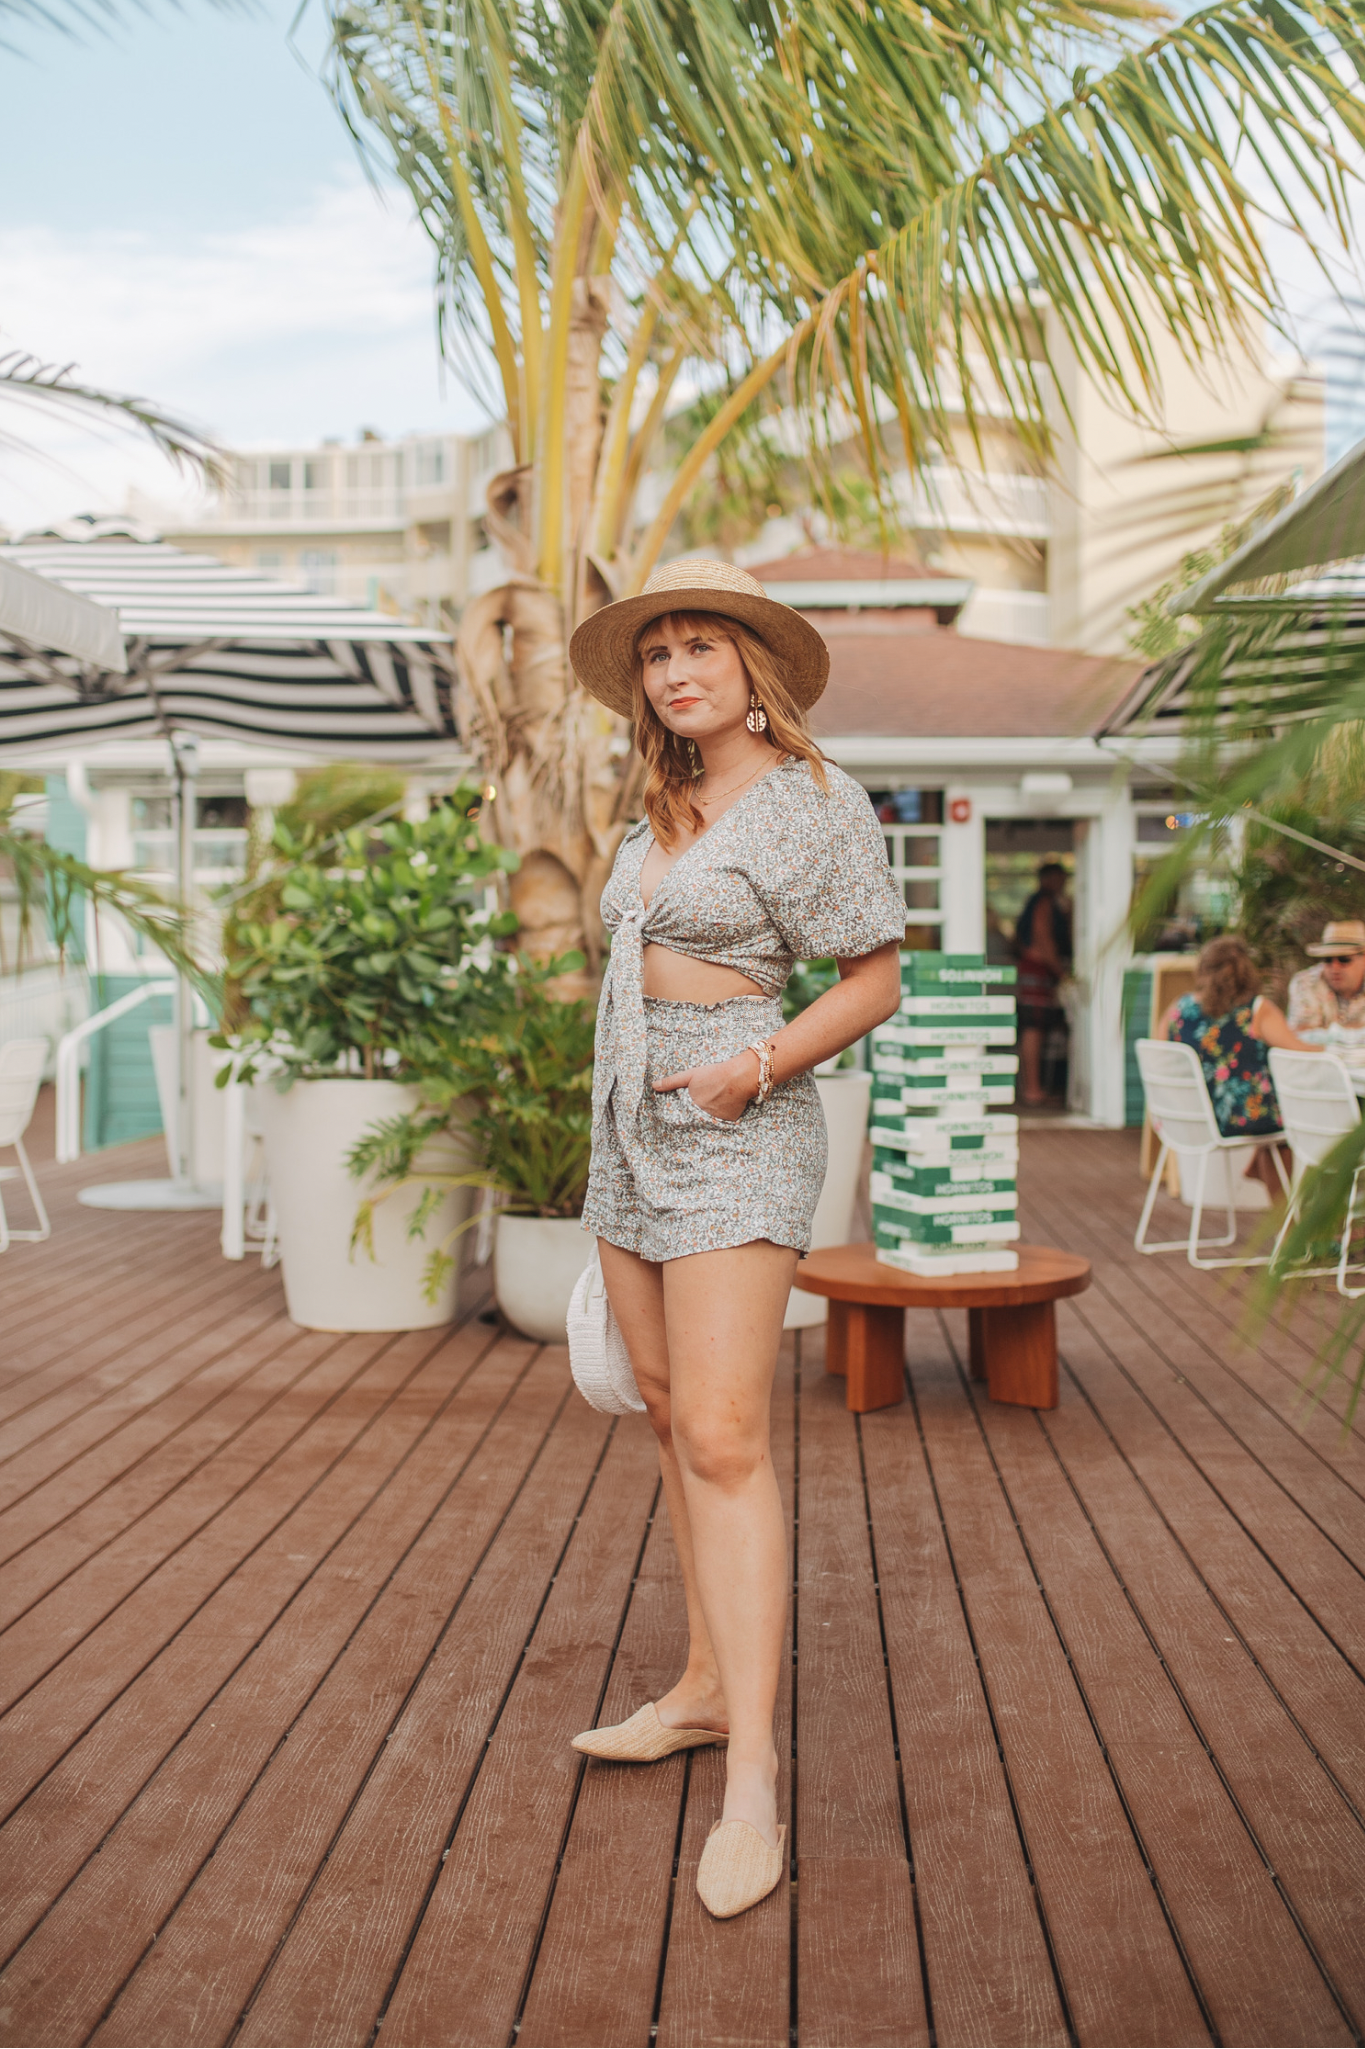 Linen Shorts Outfit Ideas for Summer | Affordable by Amanda wear Abercrombie & Fitch Cropped Tie-Front Linen Set Top with floral printed Linen-Blend Pull-On Shorts